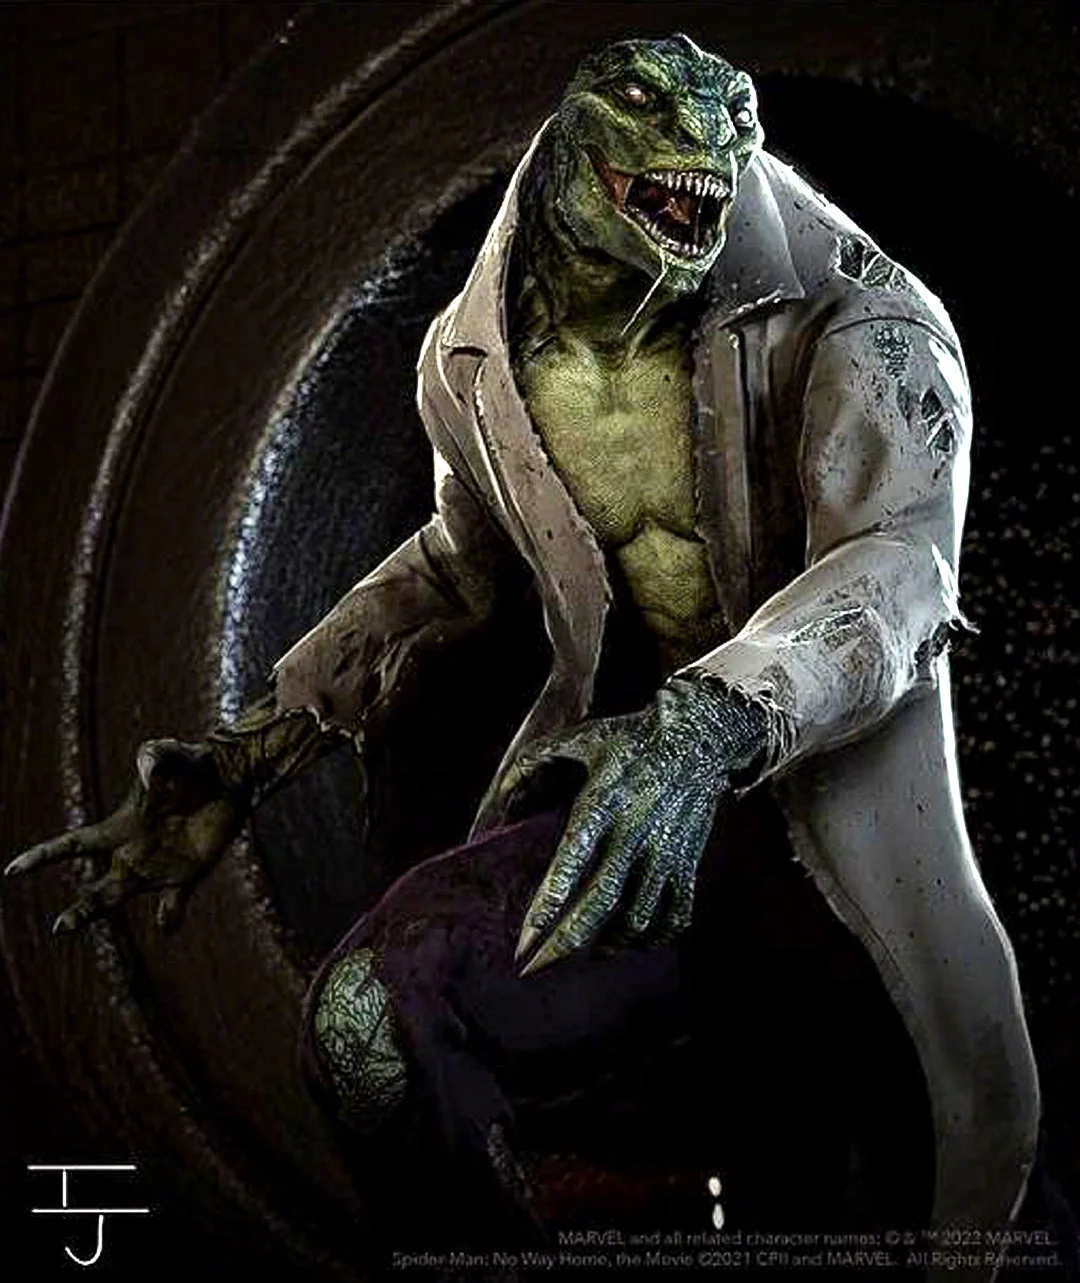 Early concept design for Lizard in 'Spider-Man: No Way Home' revealed